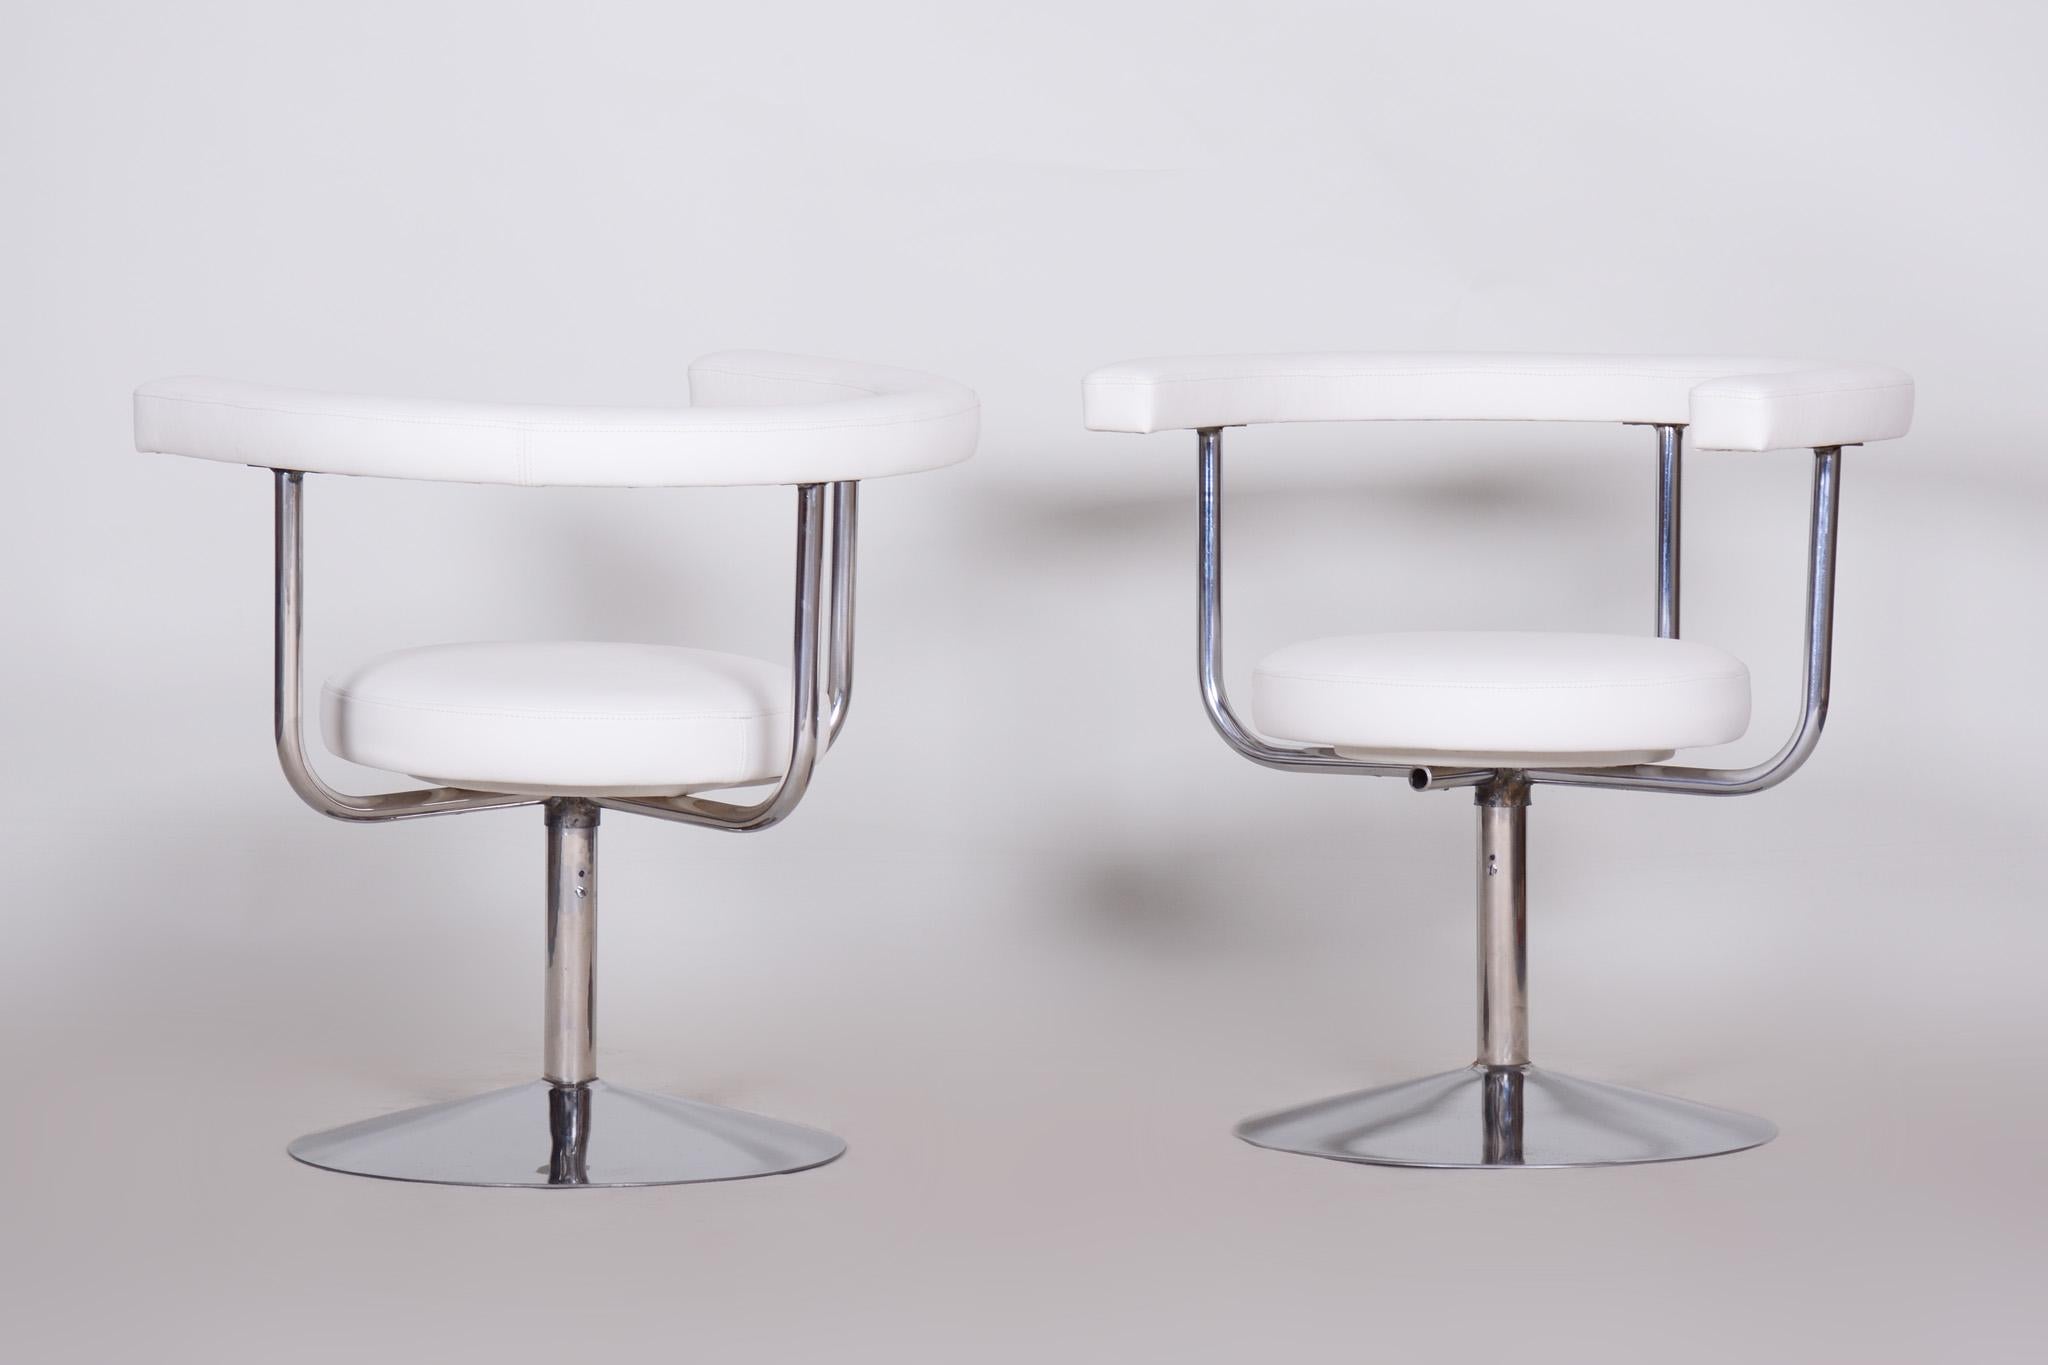 Bauhaus Pair of White Leather Swivel Chairs Made in Czechia, 1940s, Fully Restored For Sale